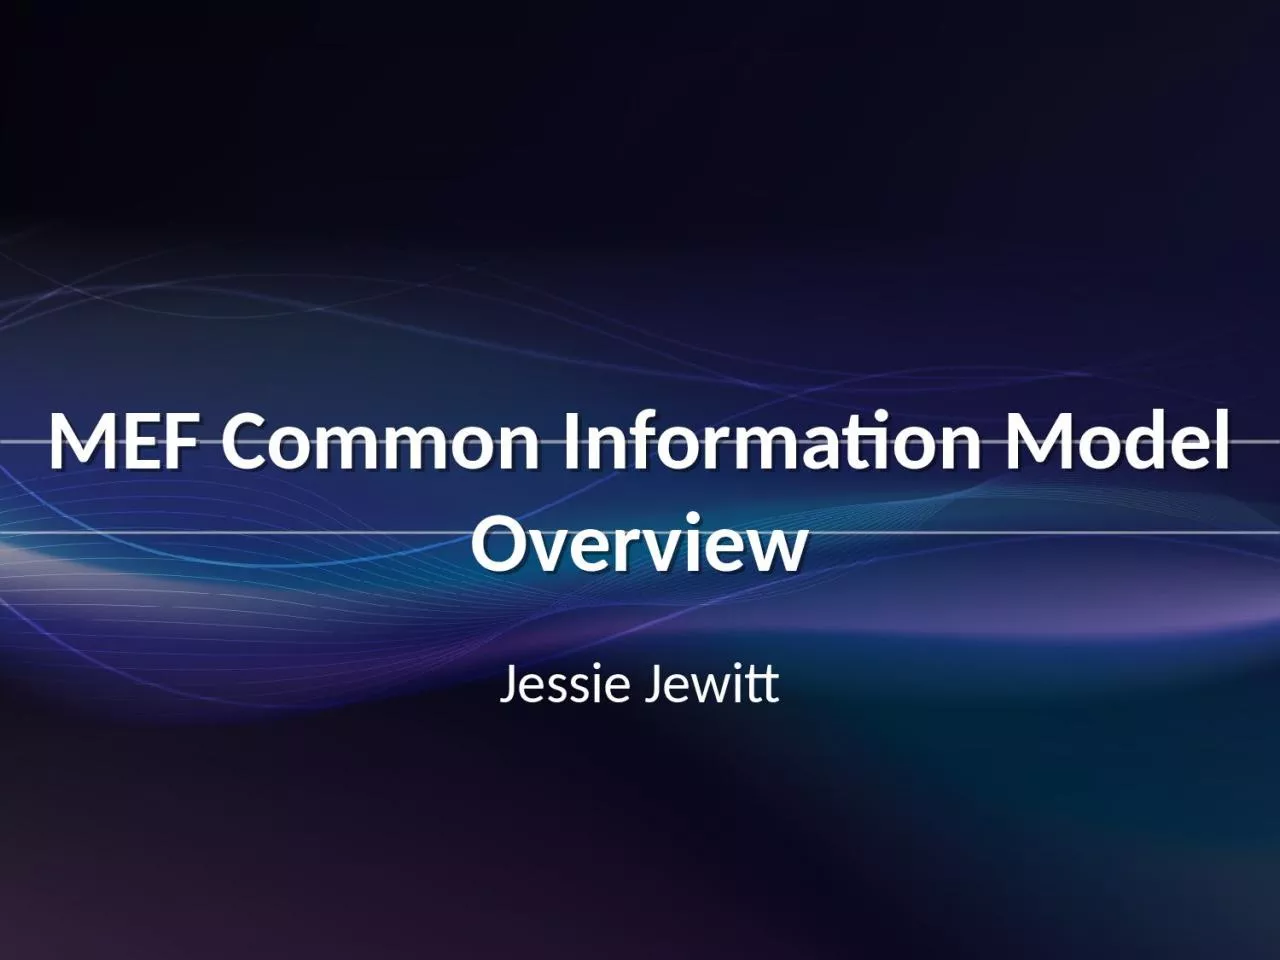 MEF Common Information Model Overview